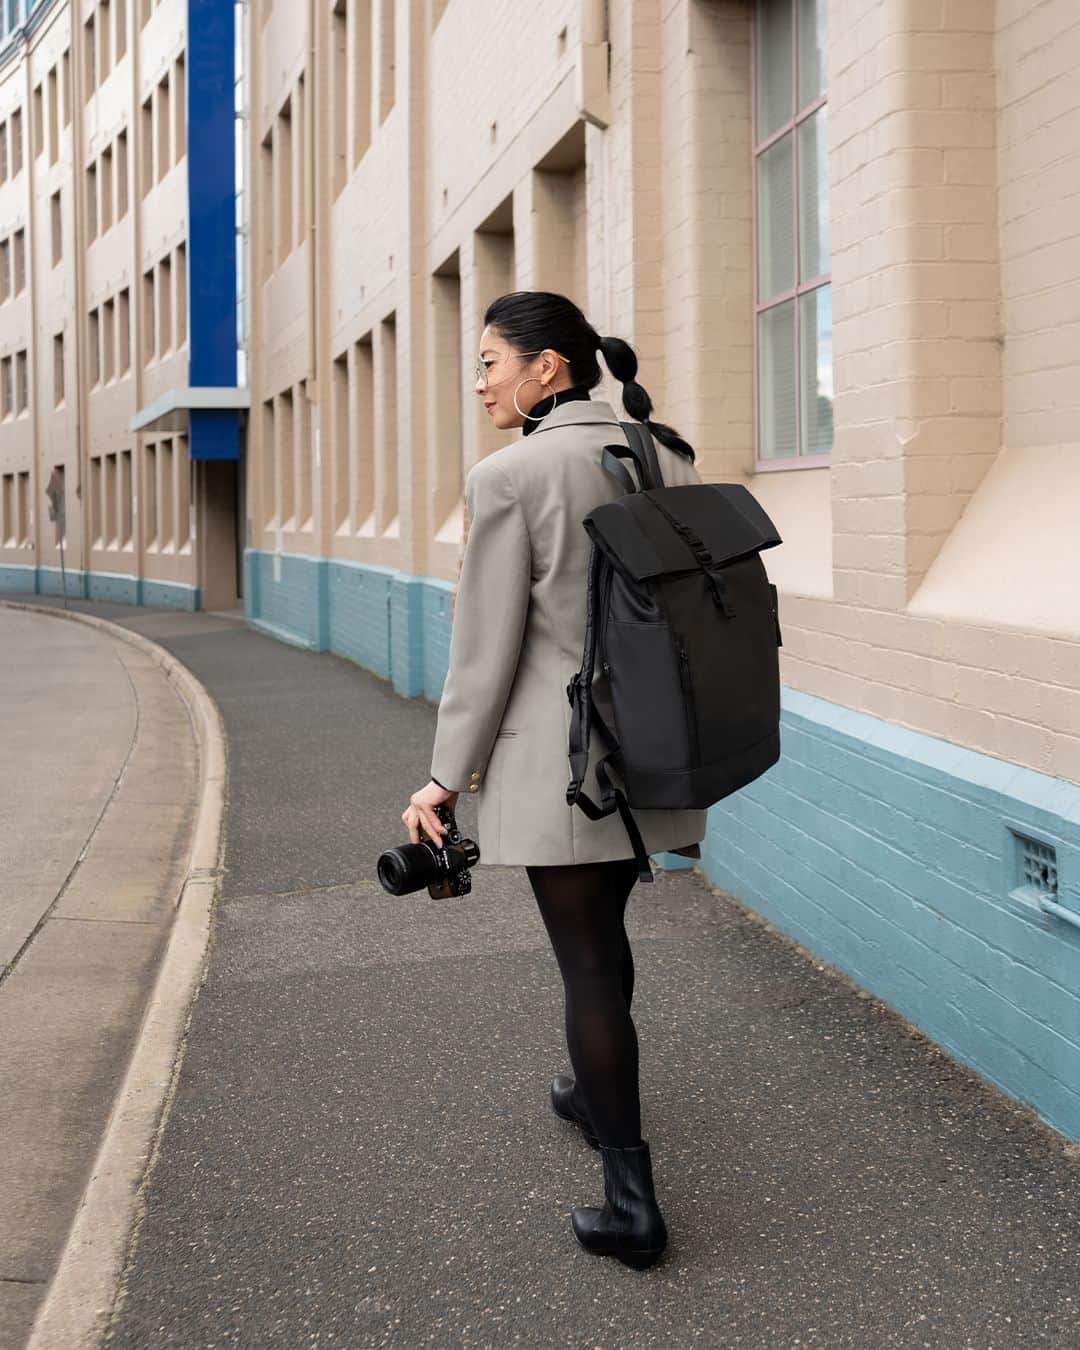 Nikon Australiaのインスタグラム：「Introducing the perfect combo for your photography adventures: the @GastonLuga x @NikonAustralia backpack, as featured by @heykarenwoo! 📷🎒  Gaston Luga's sleek and stylish backpack, paired with the Z f, makes for an unbeatable team. From exploring breathtaking landscapes to navigating urban jungles, this duo has got your back. Let your creativity roam freely with the ultimate travel companions. 🌍✨  Photos by @heykarenwoo  #Nikon #NikonAustralia #MyNikonLife #NikonCreators #NIKKOR #NikonZf #Zf #Zseries #GastonLuga #TravelPhotography #StreetPhotography #Australia」